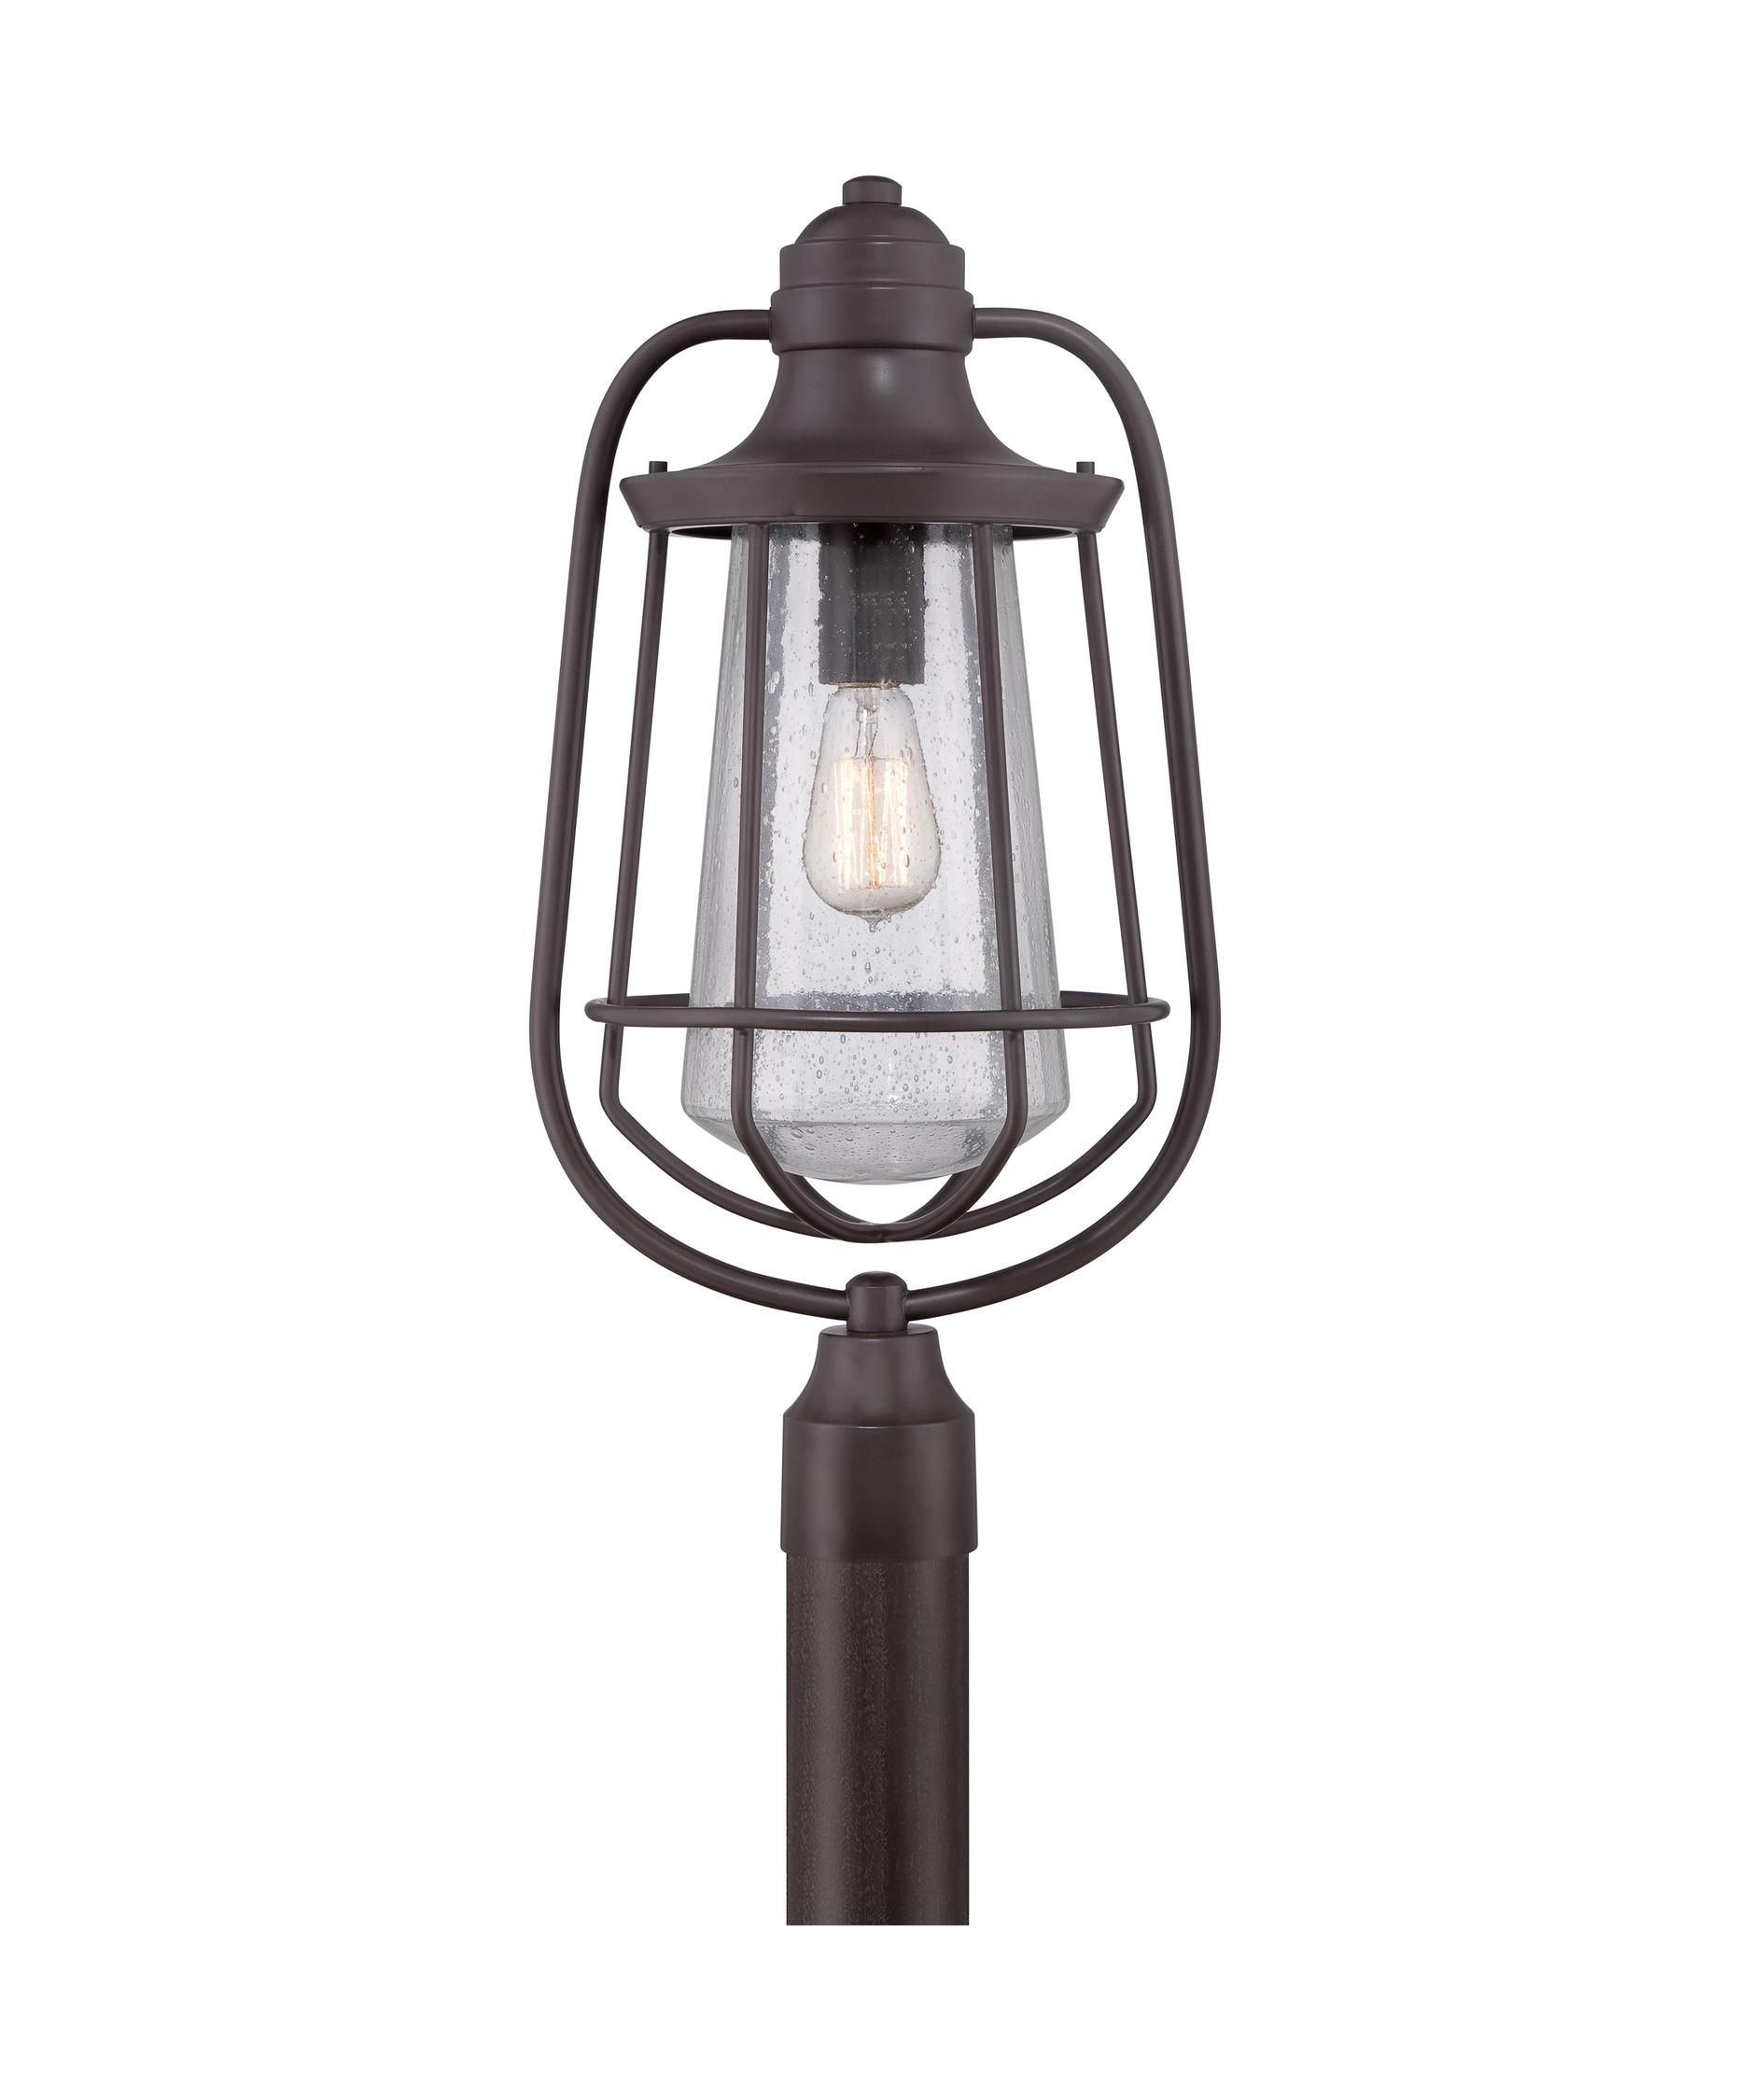 Quoizel Mre9009 Marine 12 Inch Wide 1 Light Outdoor Post Lamp With Outdoor Wall And Post Lighting (View 2 of 15)